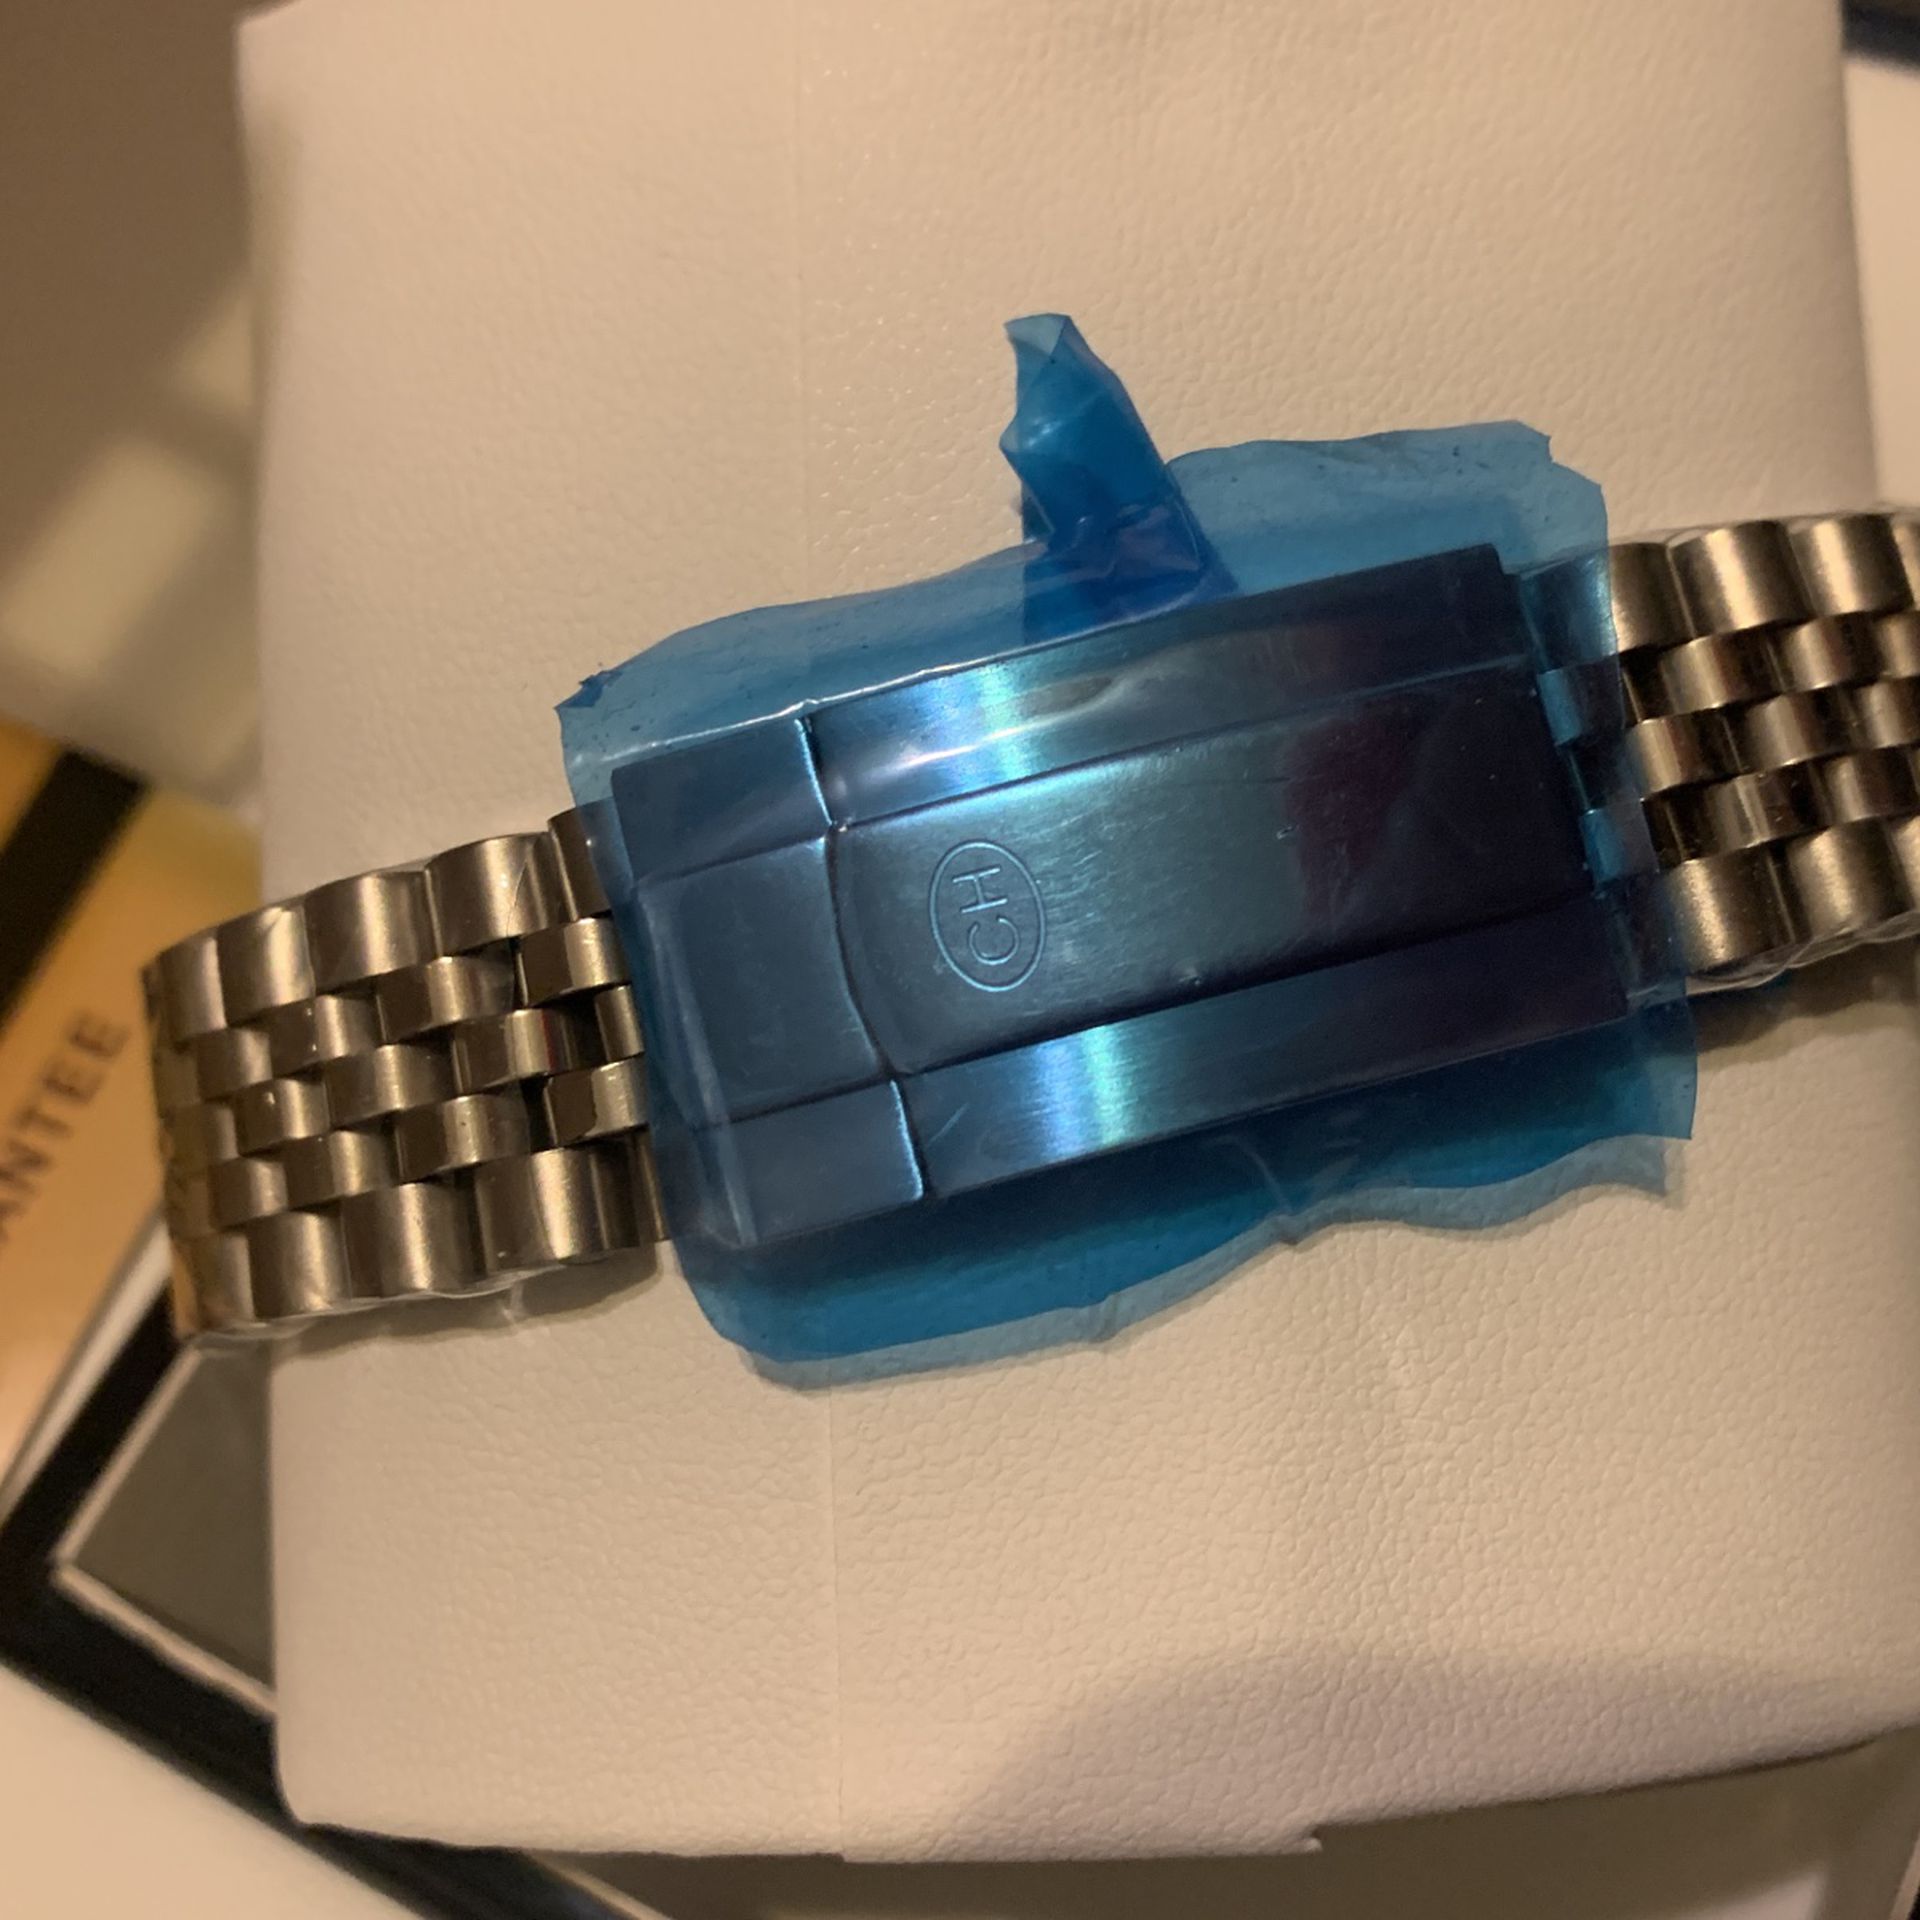 Chairman Watch for Sale in Miami, FL - OfferUp